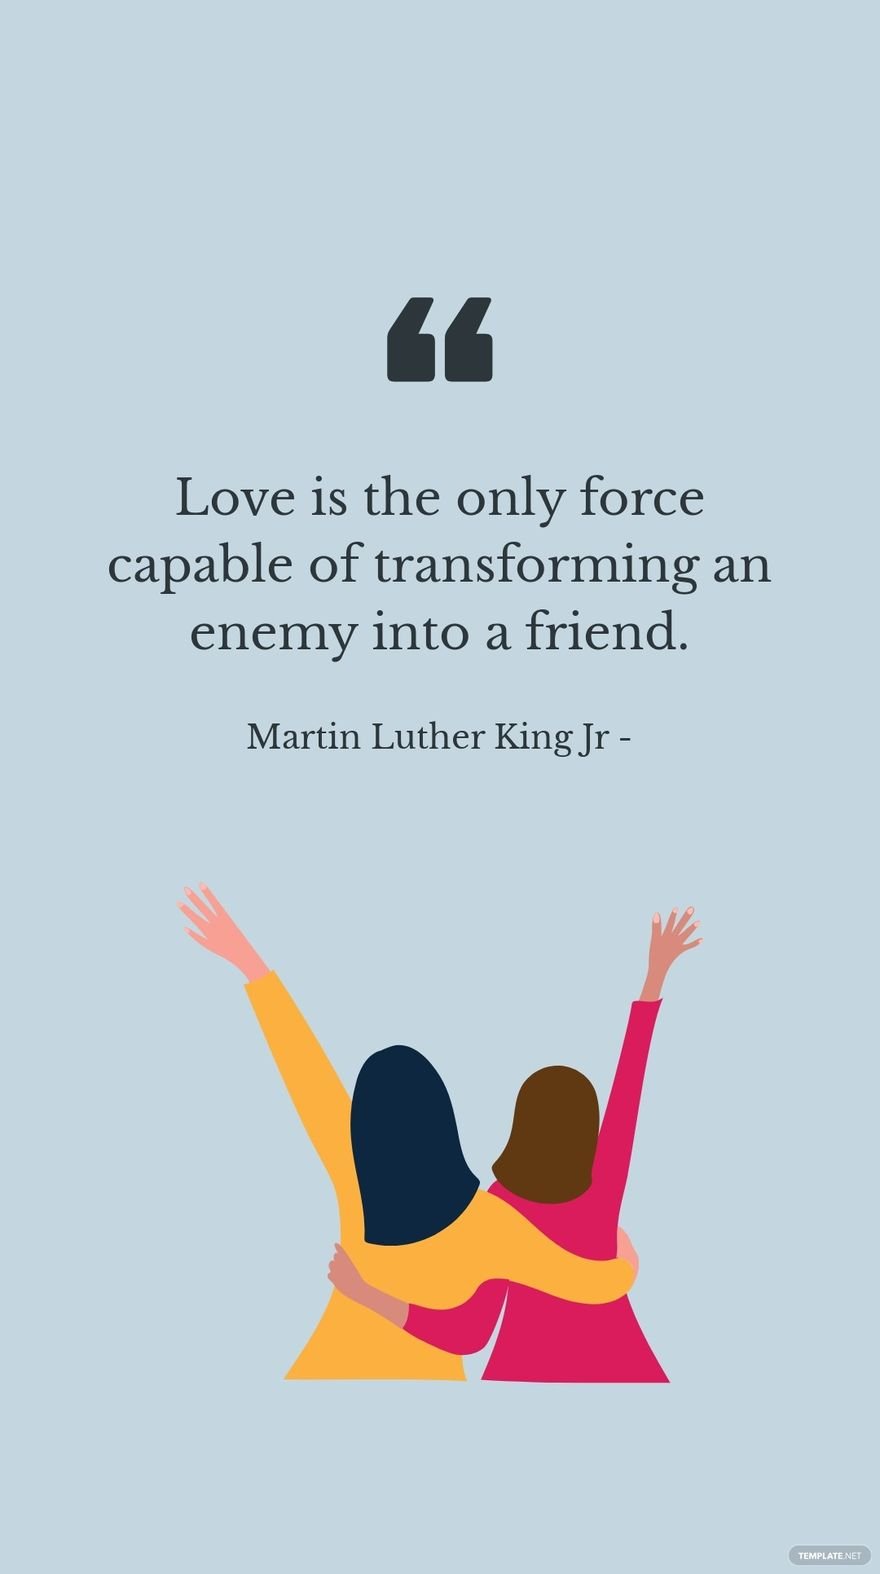 Free Martin Luther King, Jr - Love is the only force capable of transforming an enemy into a friend.